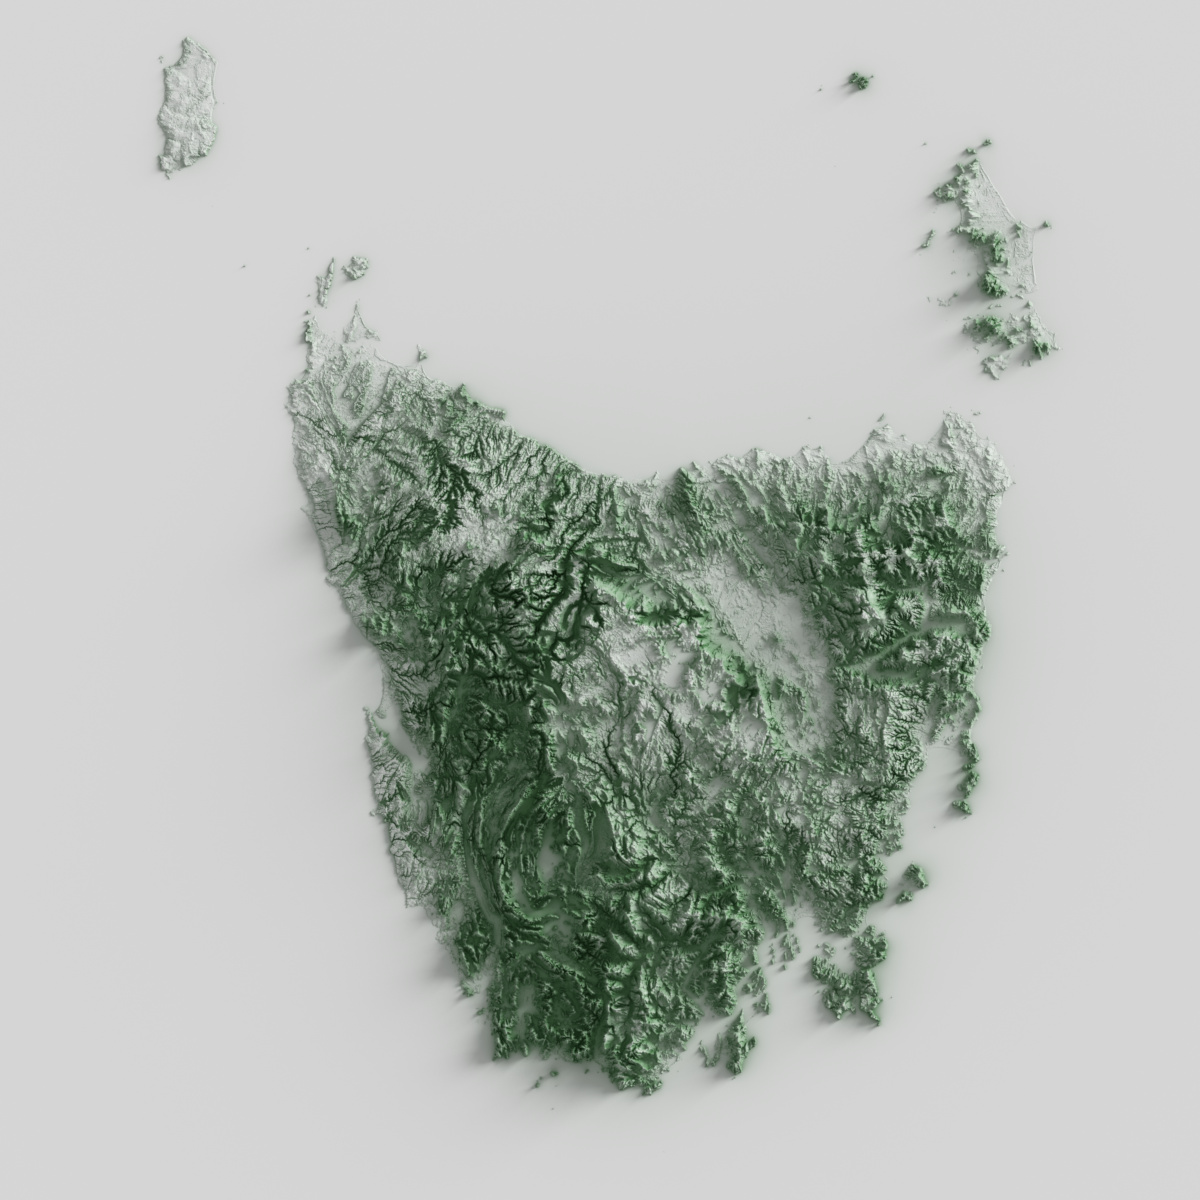 Preview of terrain heightmap render of the Australian state of Tasmania using occlusion shading mapping